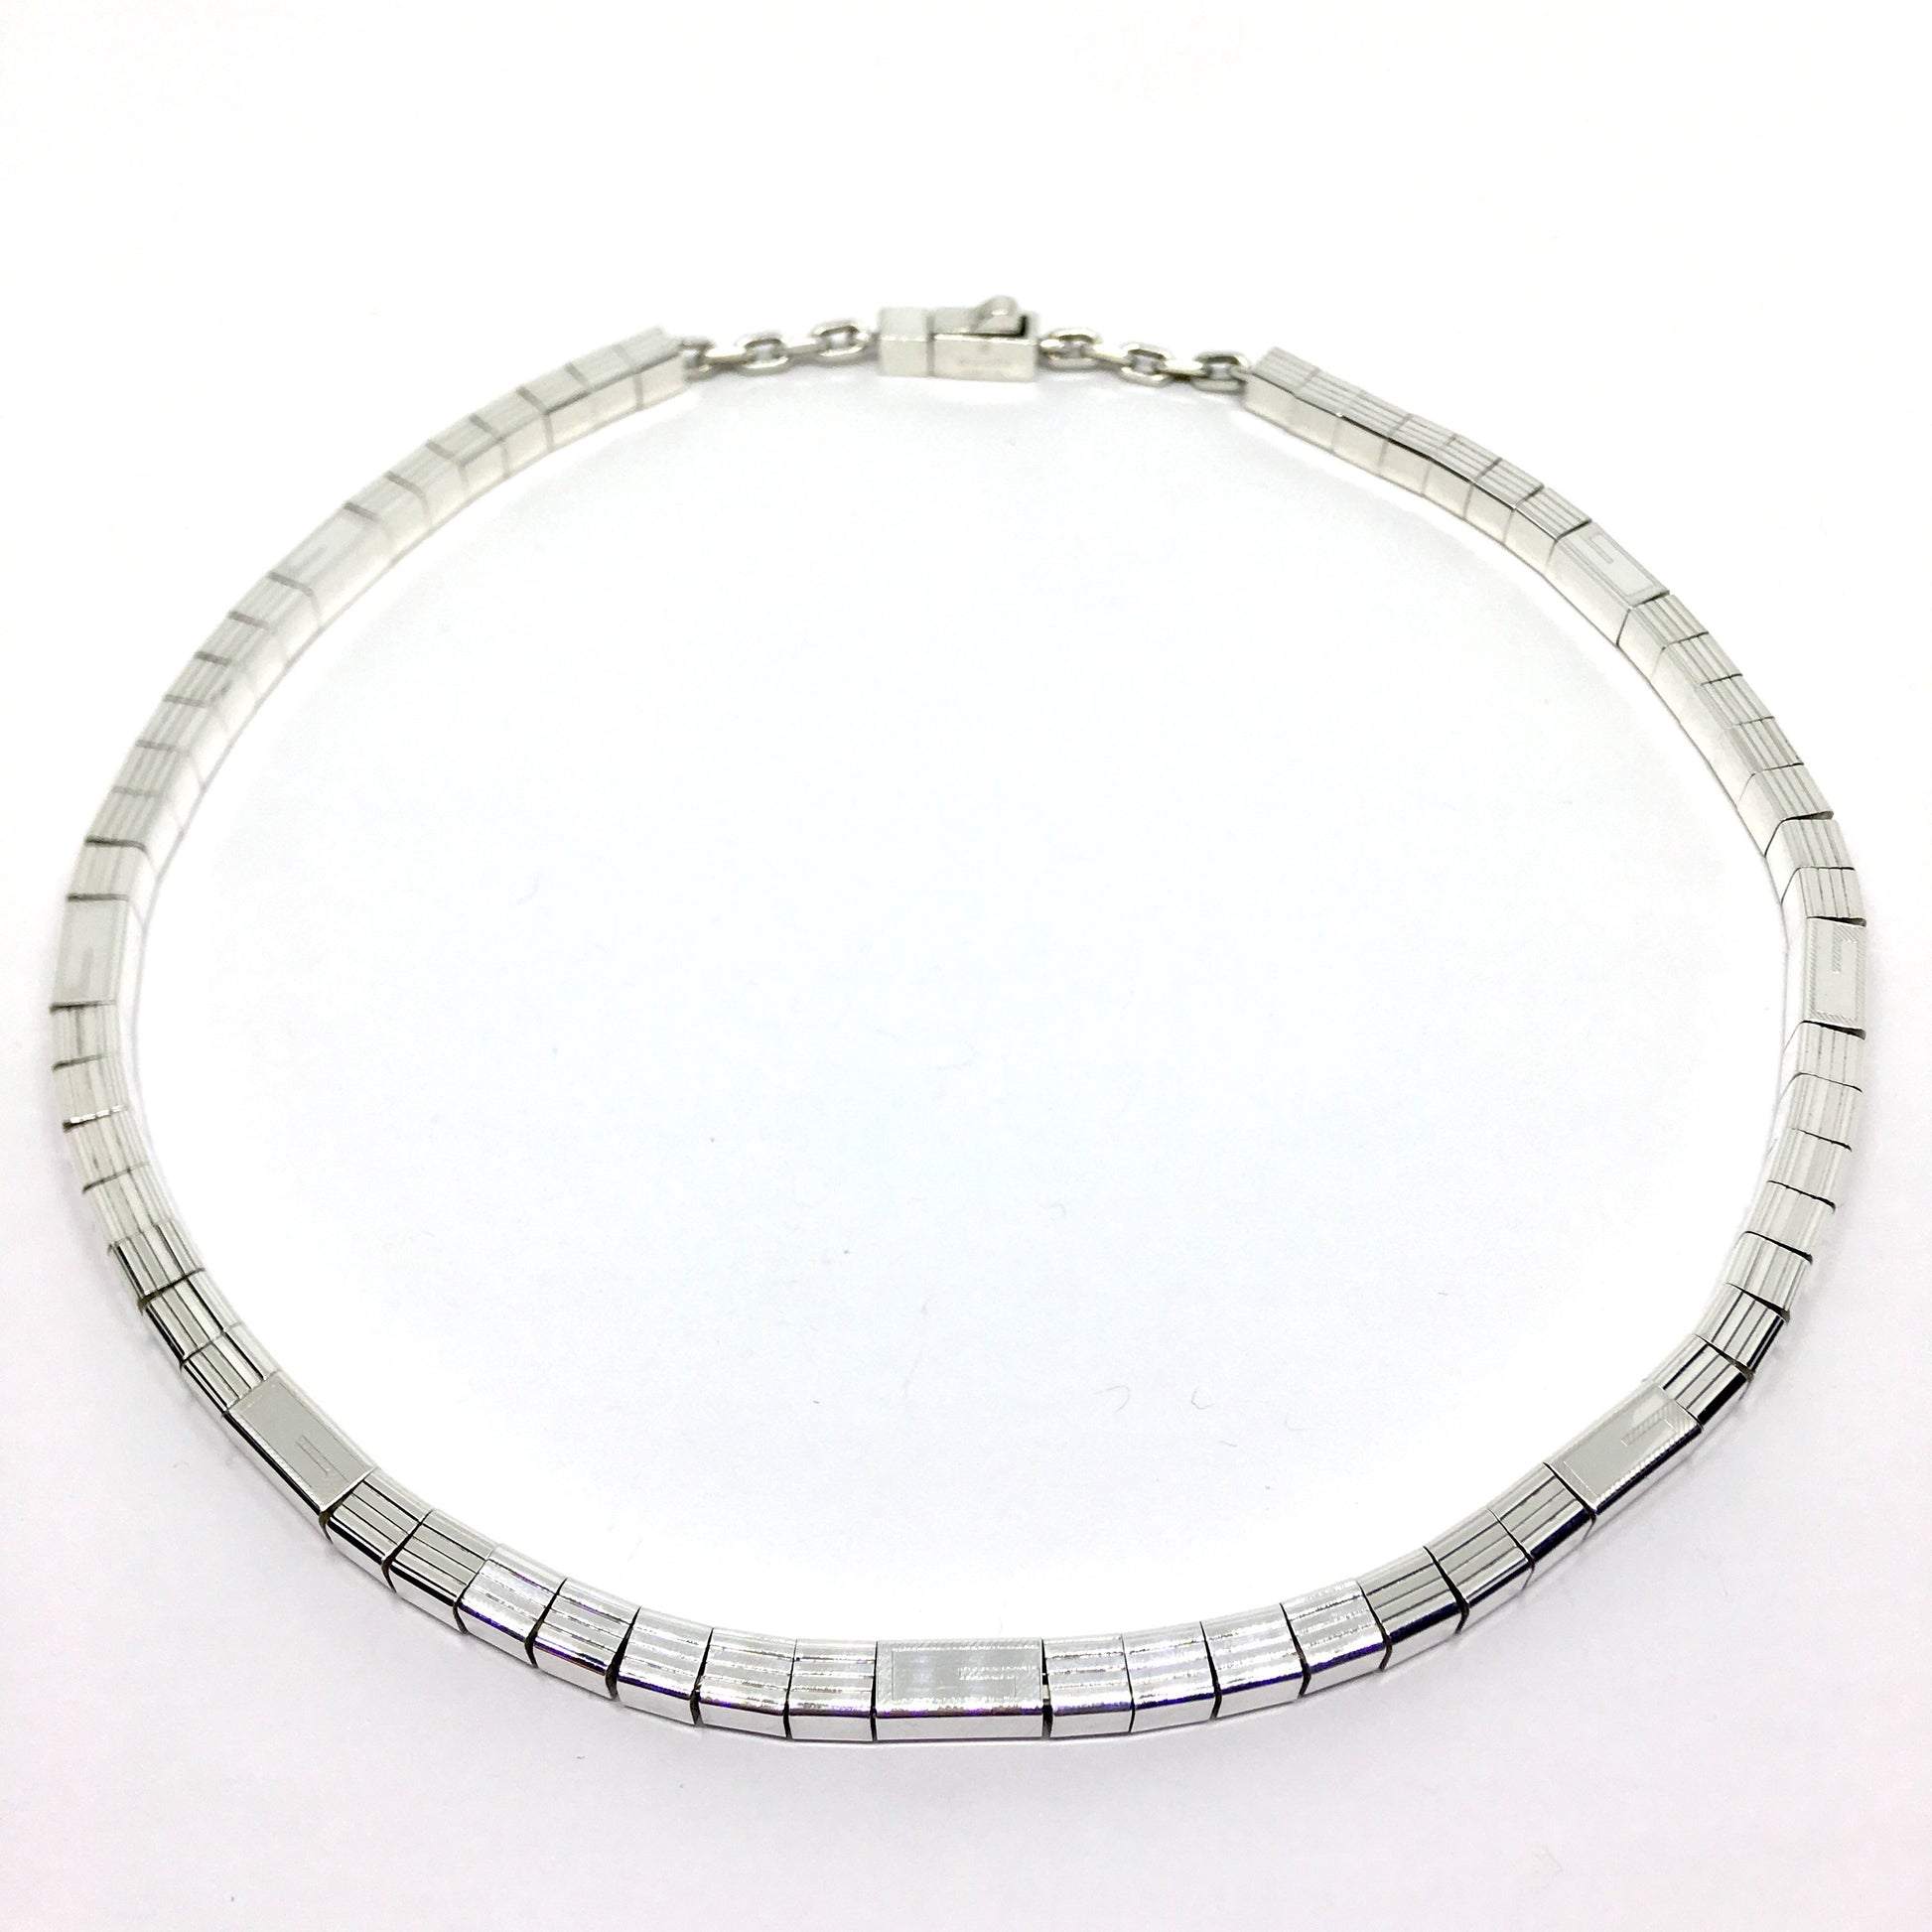 Chain | Designer Gucci 16.25" Sterling Silver Geometric Square Snake Chain Necklace | Necklace